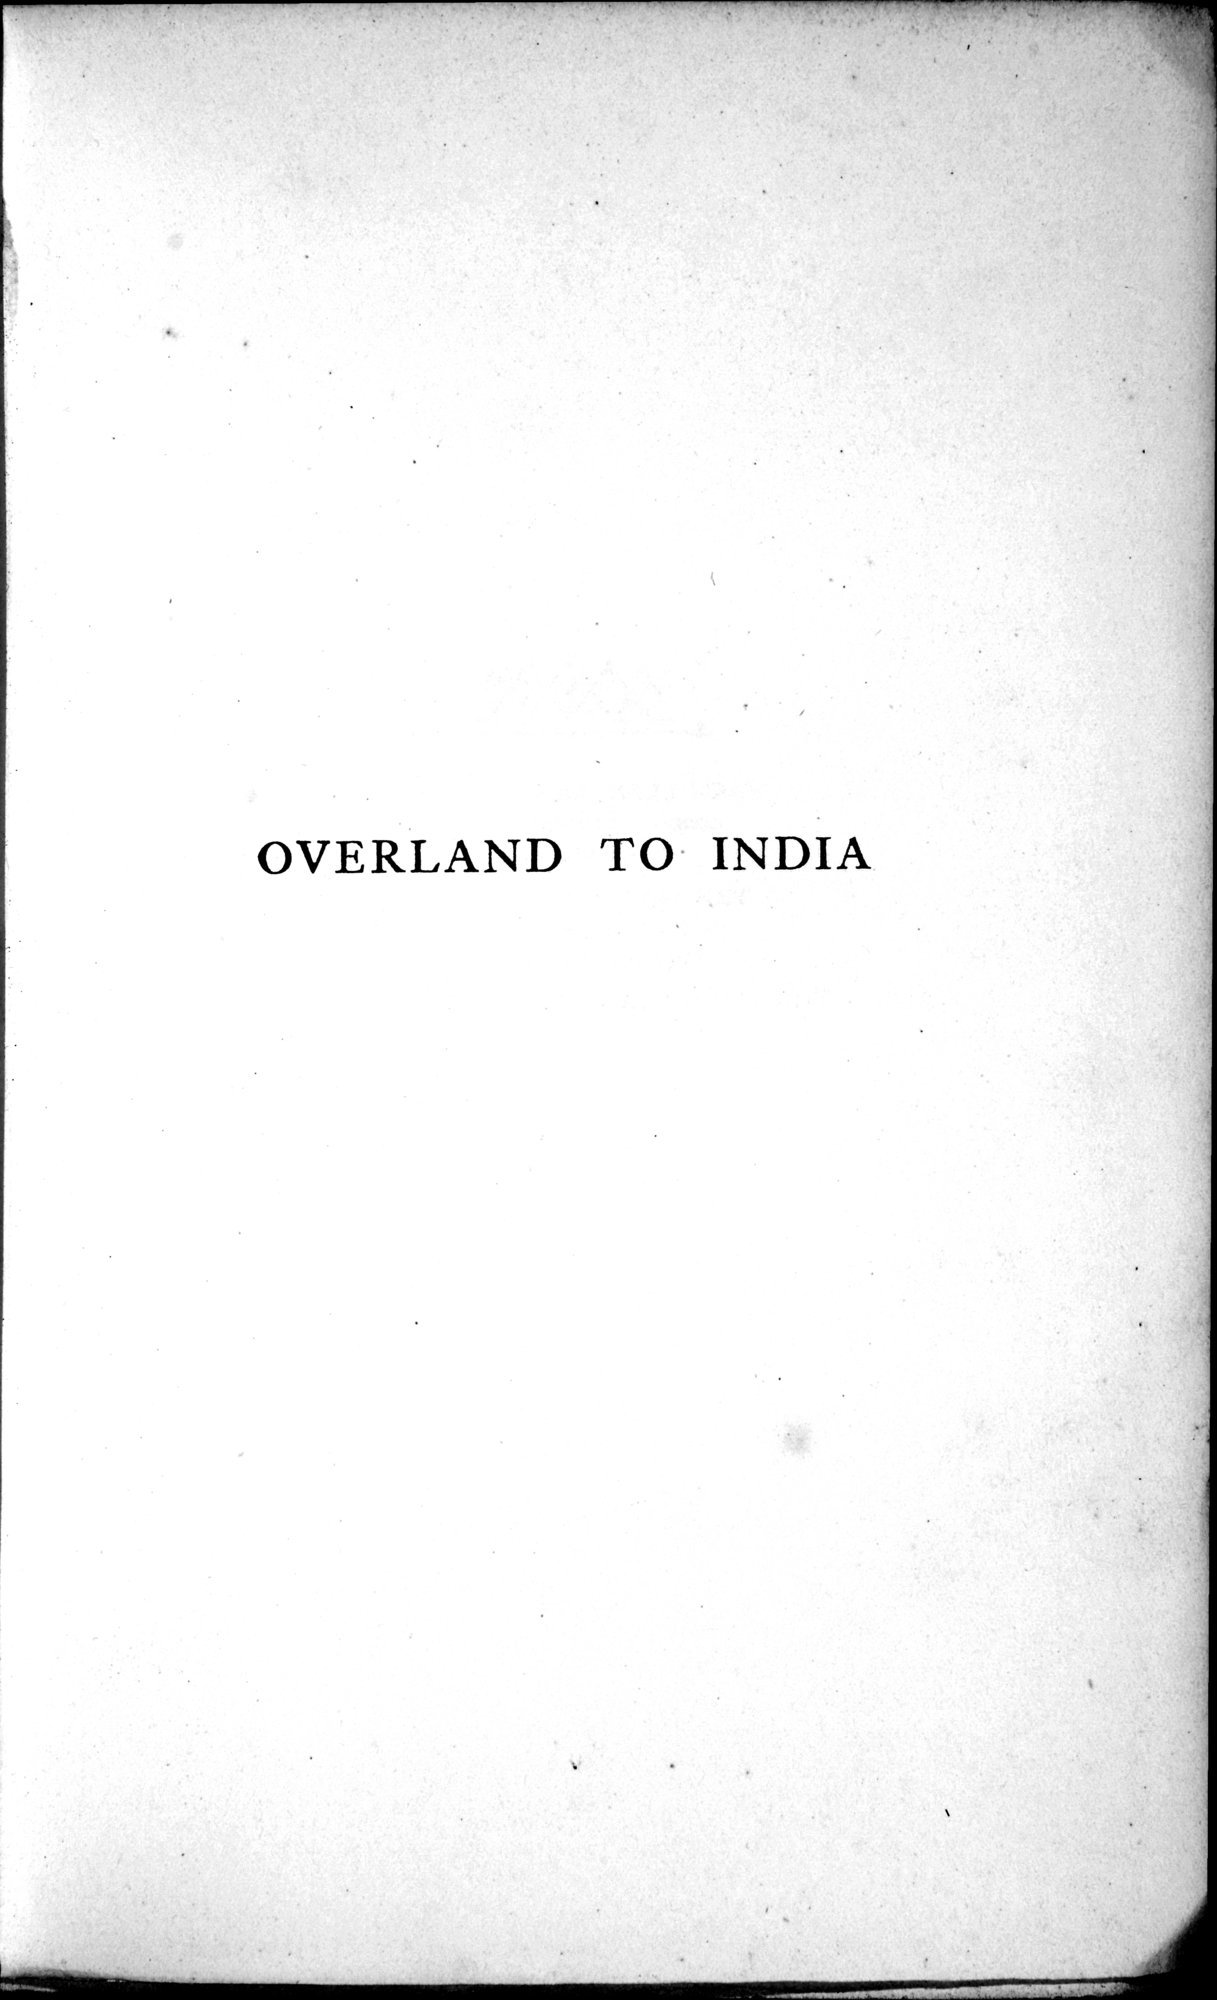 Overland to India : vol.2 / 5 ページ（白黒高解像度画像）